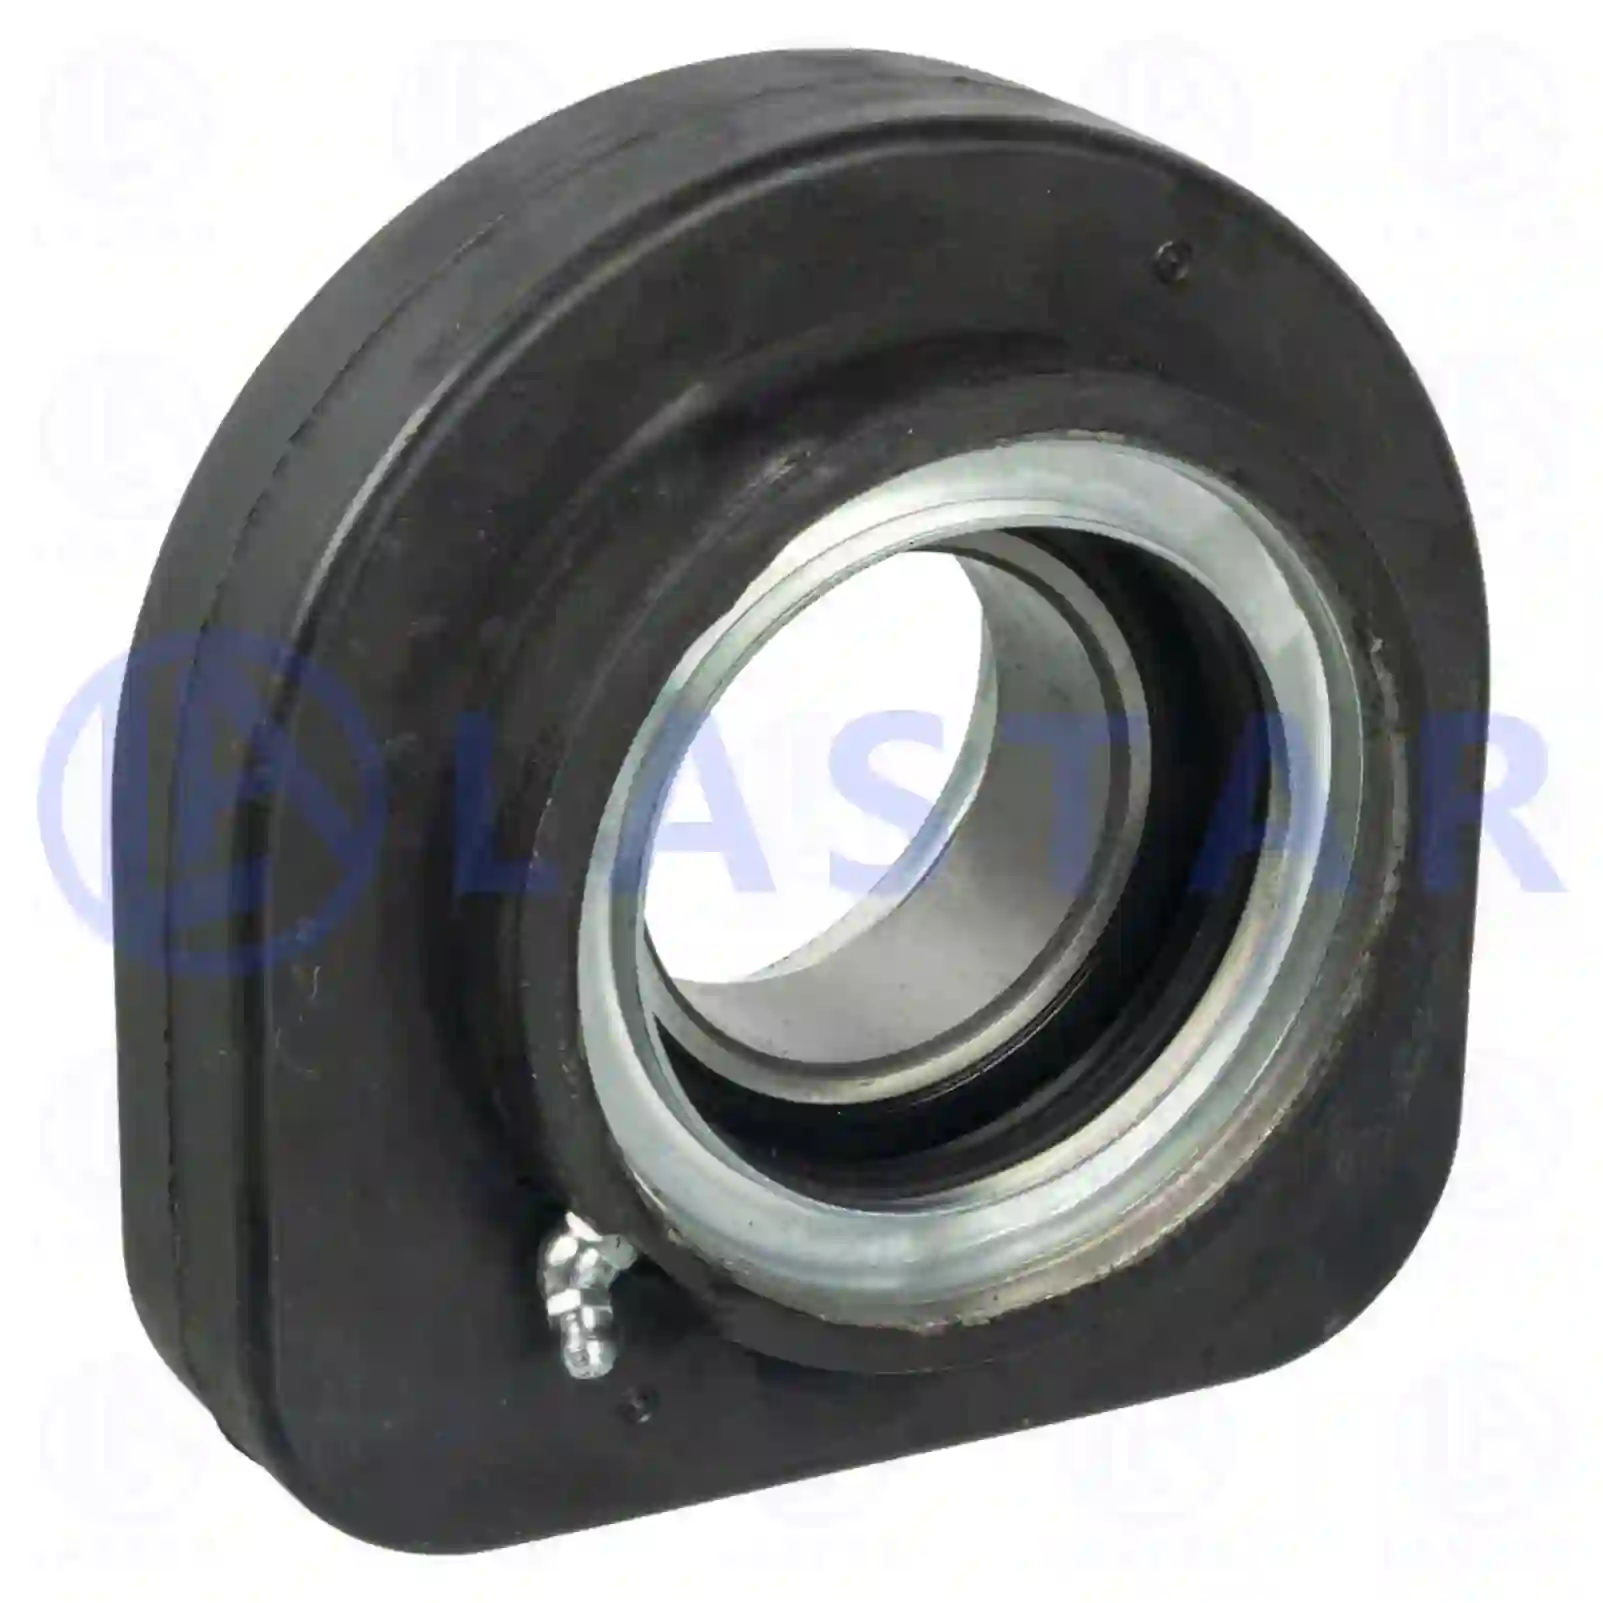 Support Bearing Center bearing, la no: 77734122 ,  oem no:1696389, 263000, ZG02473-0008 Lastar Spare Part | Truck Spare Parts, Auotomotive Spare Parts